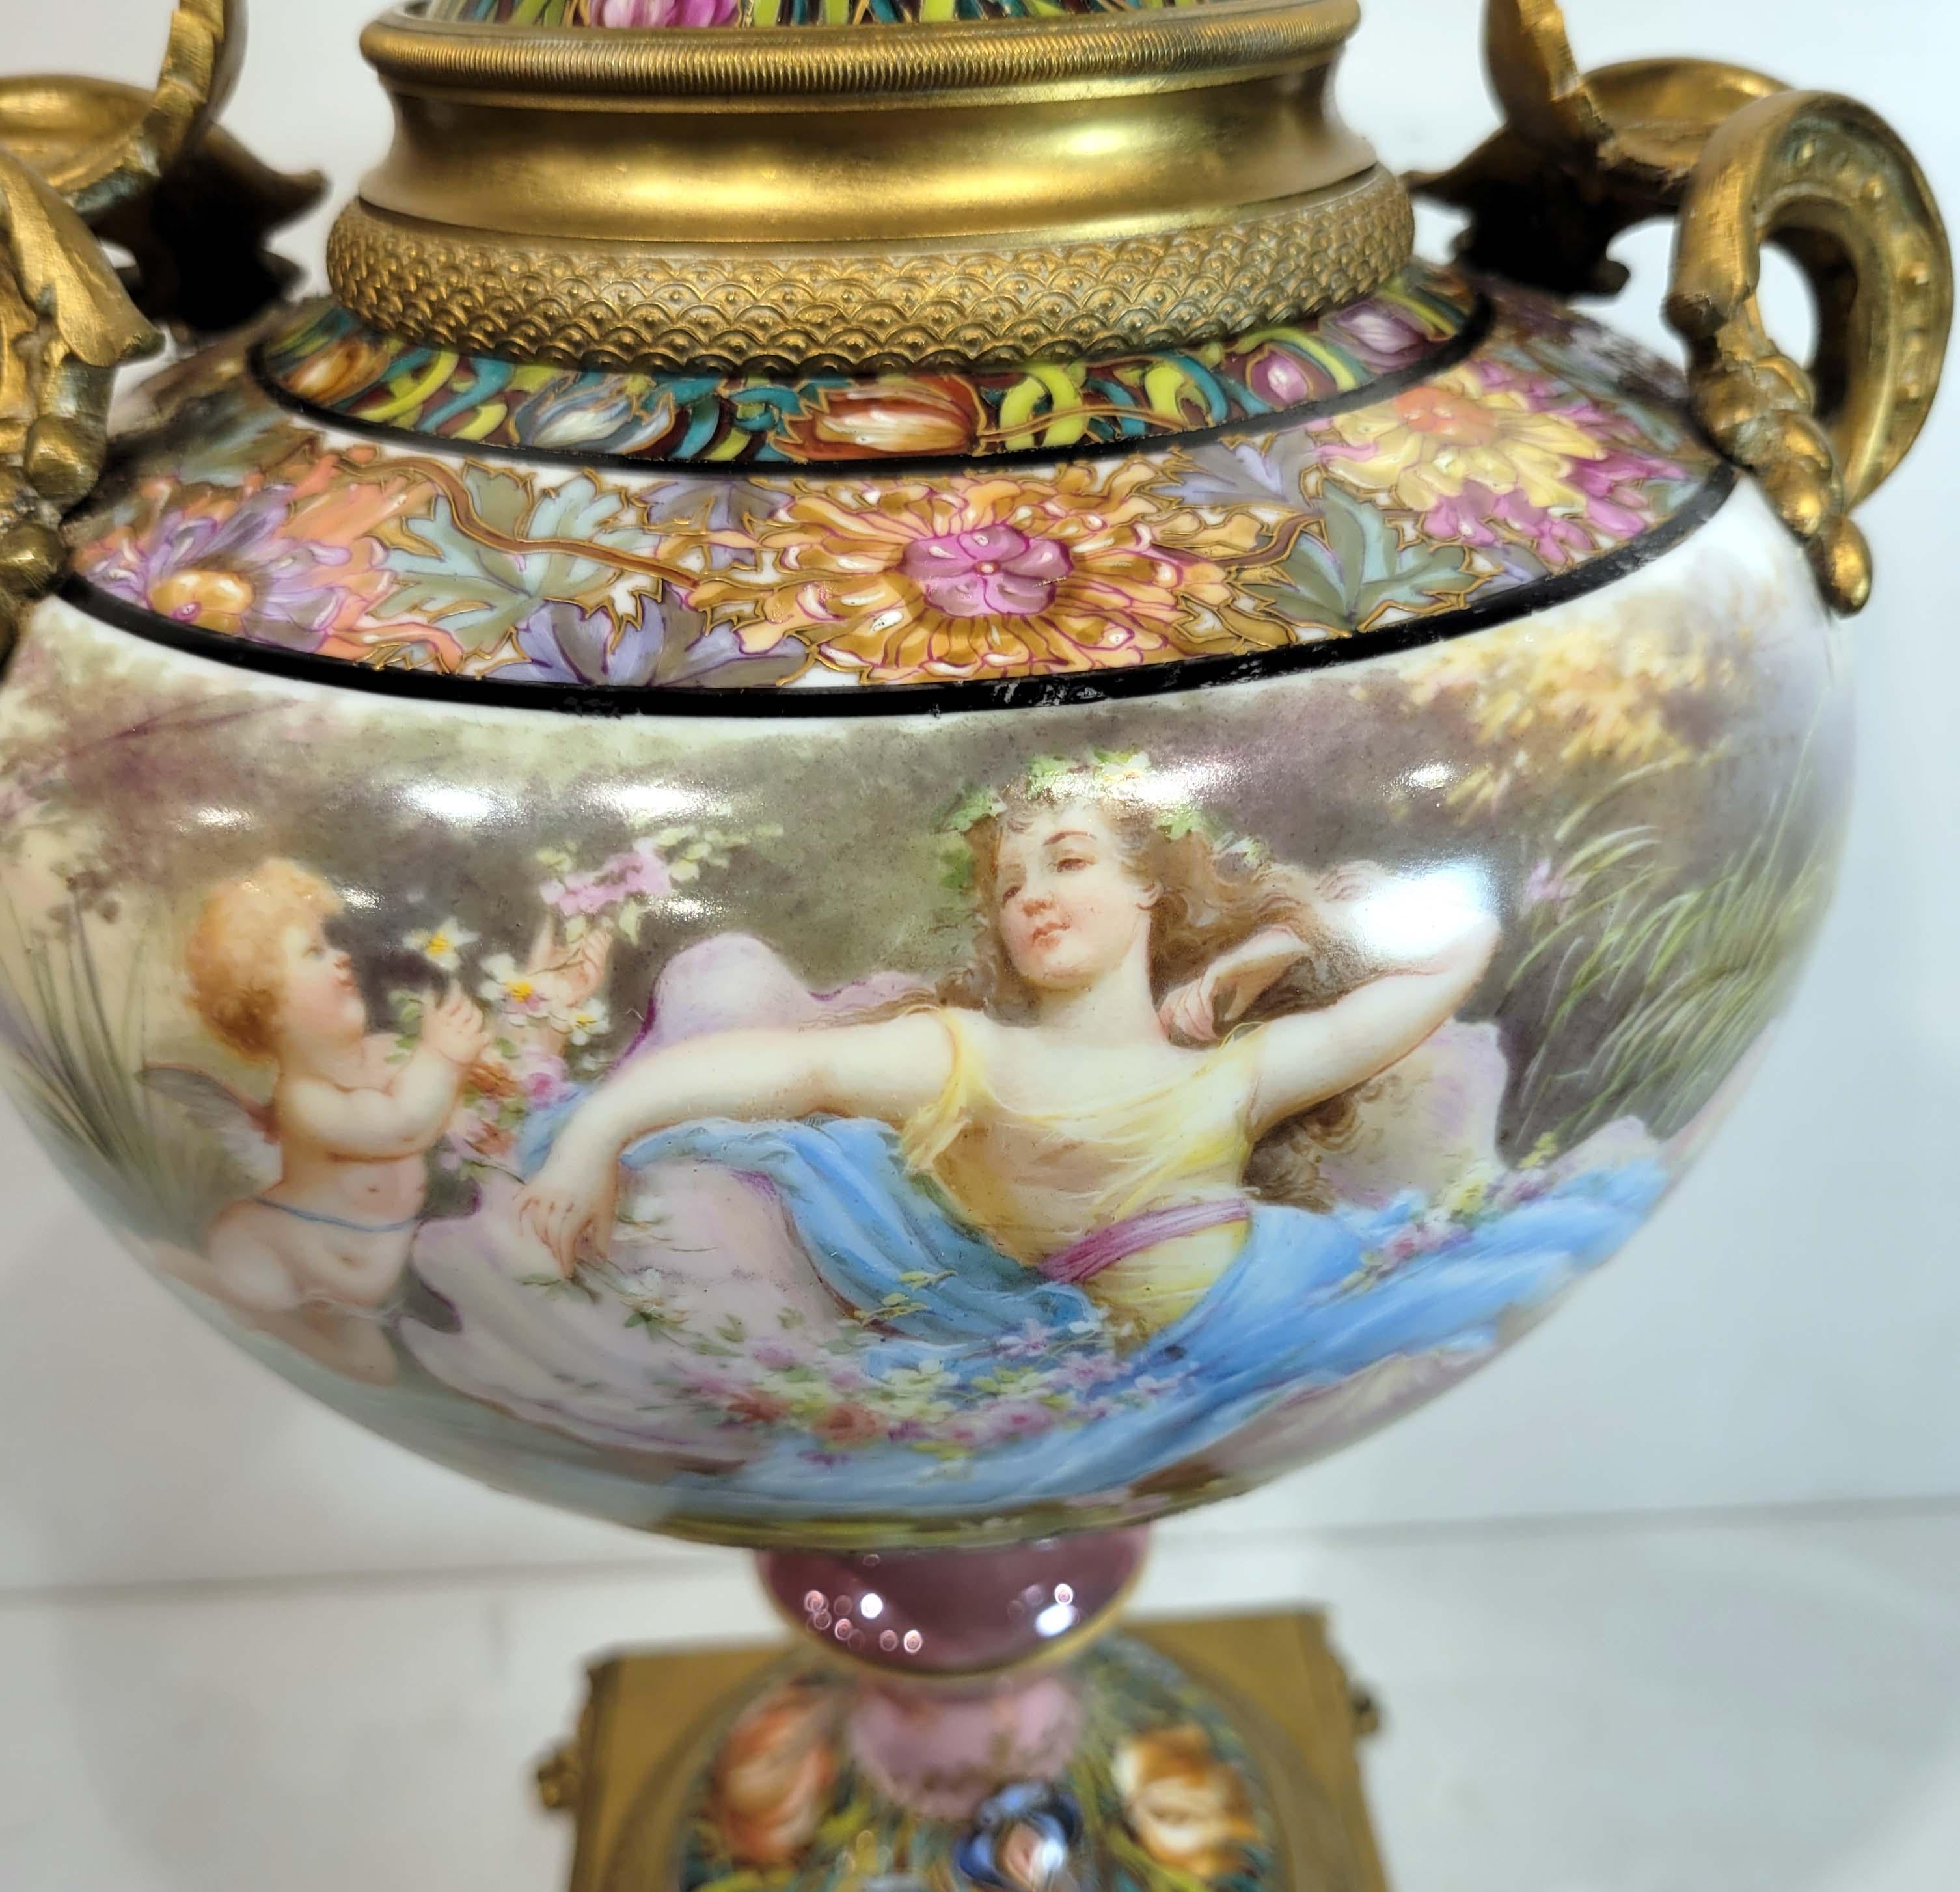 A Wonderful Art Nouveau Sevres Poecelain Covered vase. Circa 1890-1910 French art nouveau hand painted and ormolu mounted Sevres porcelain vase, depicting a maiden in a garden setting with a cherub decorating her with wild flowers while she has her